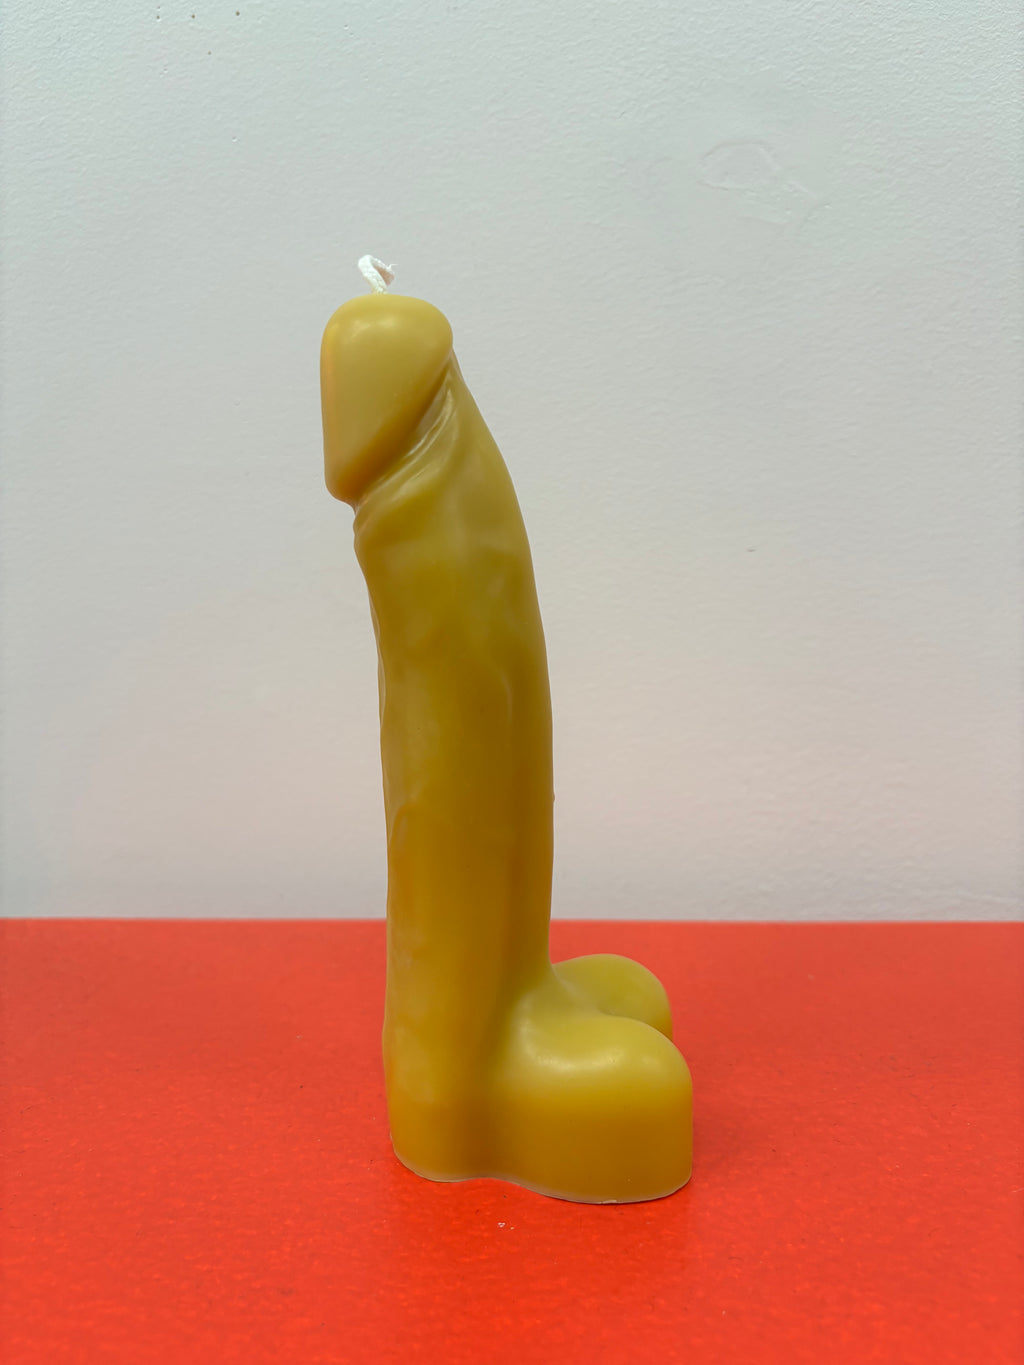 Lingam Candle/ the Sacred/ Penis Candle Yellow Beeswax